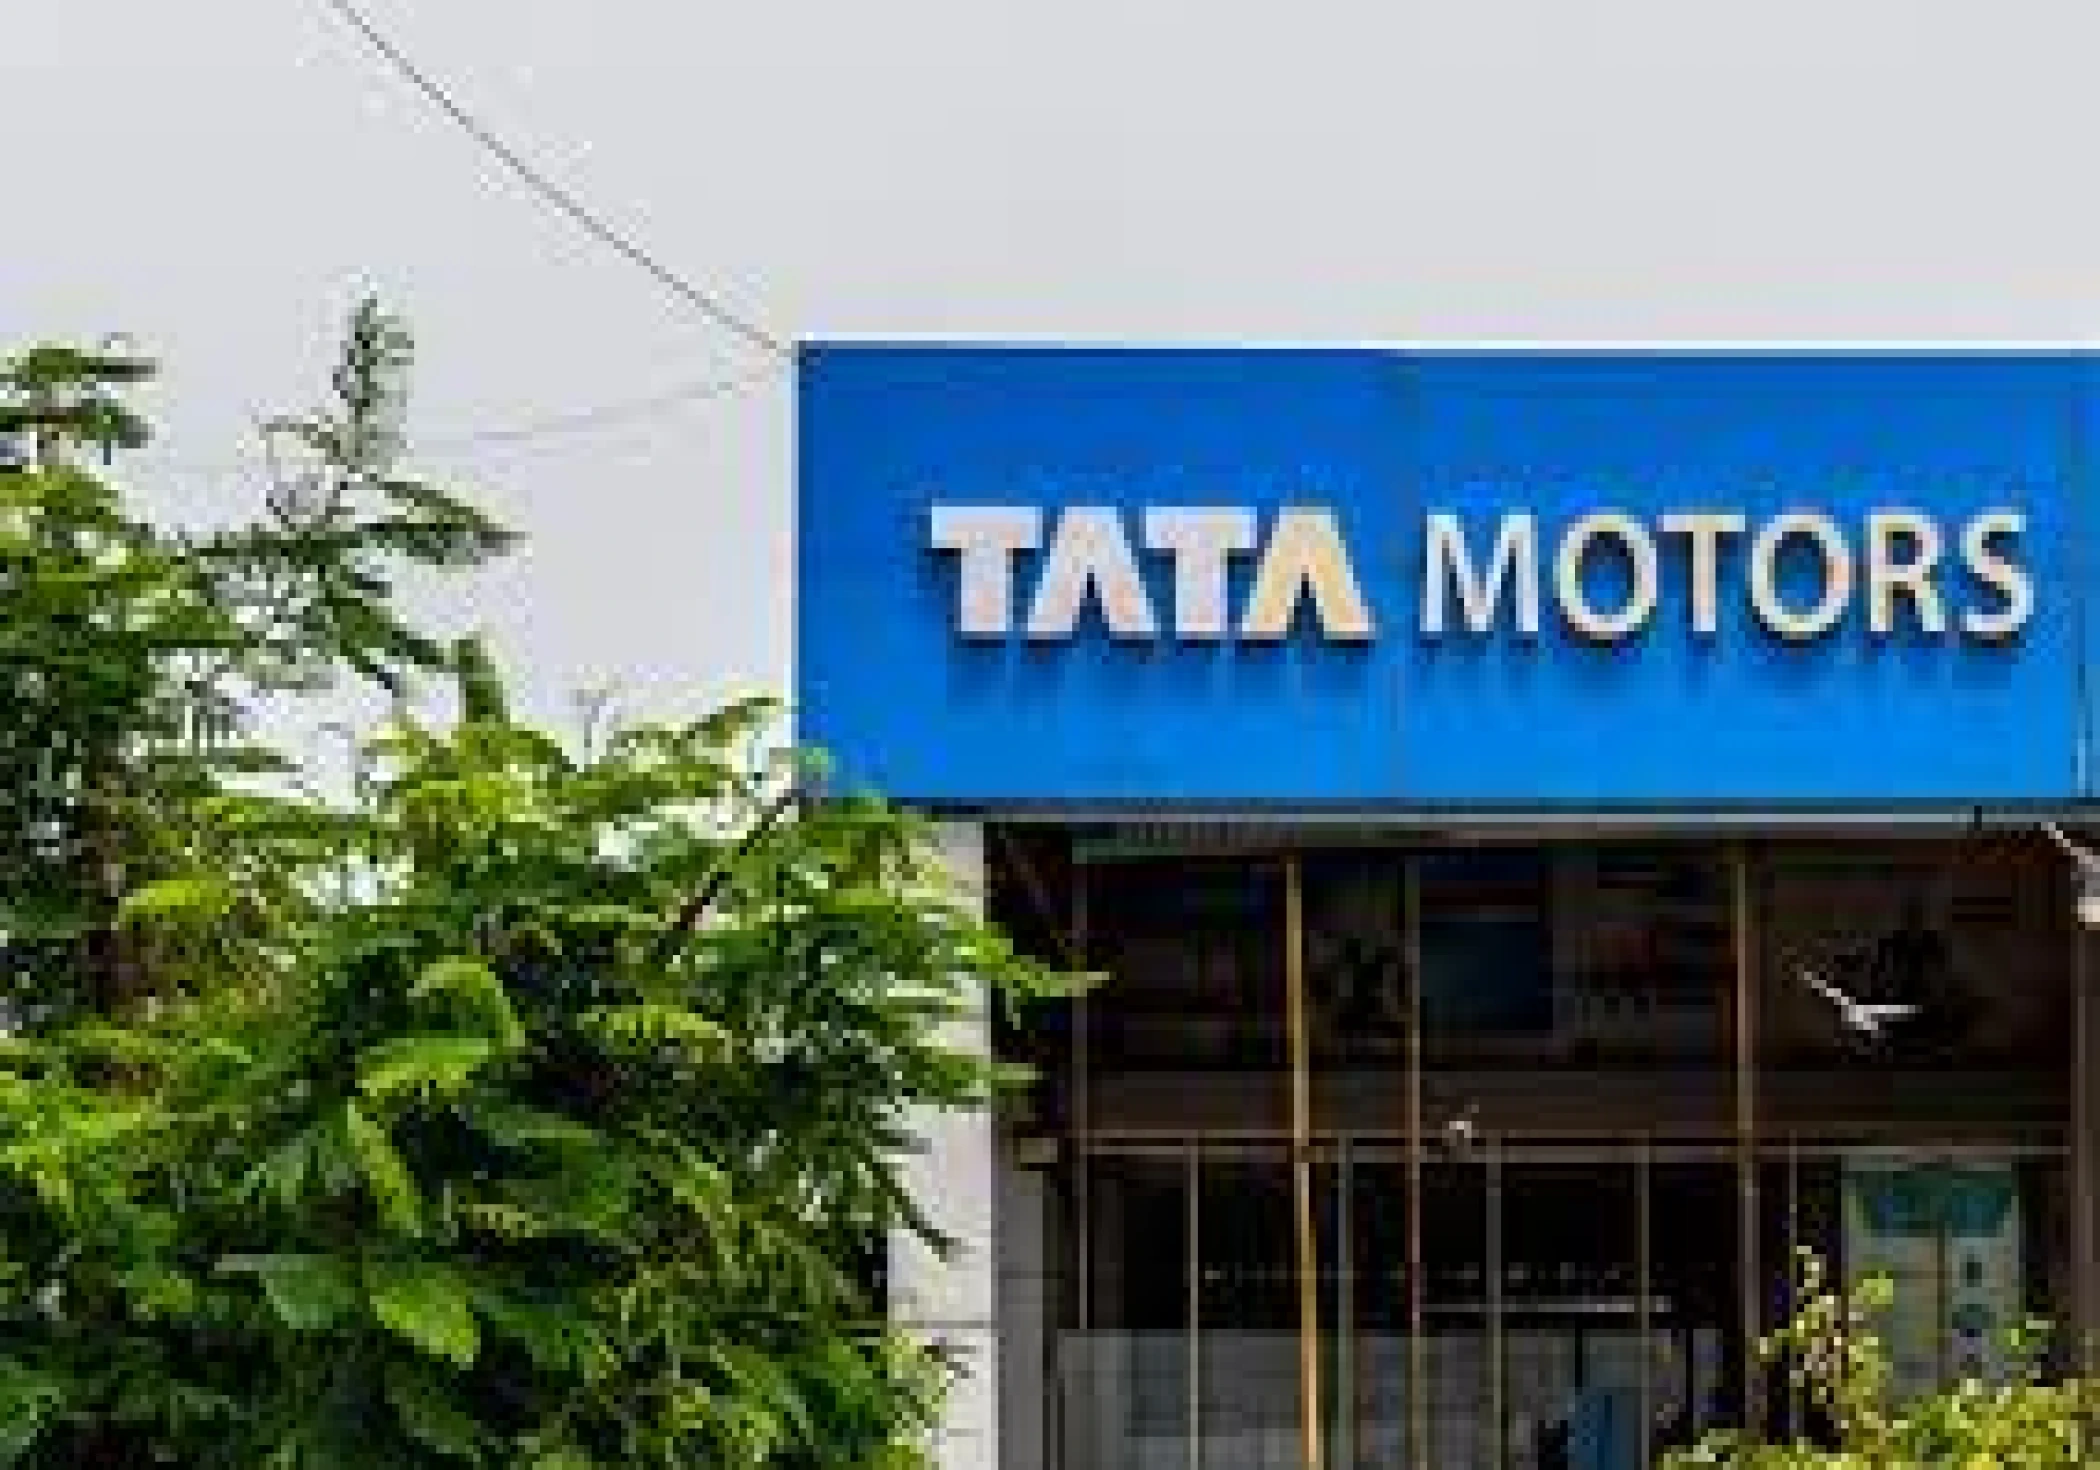 Tata Motors Invests Big in New Products and Technologies: JLR Gets Lion's Share